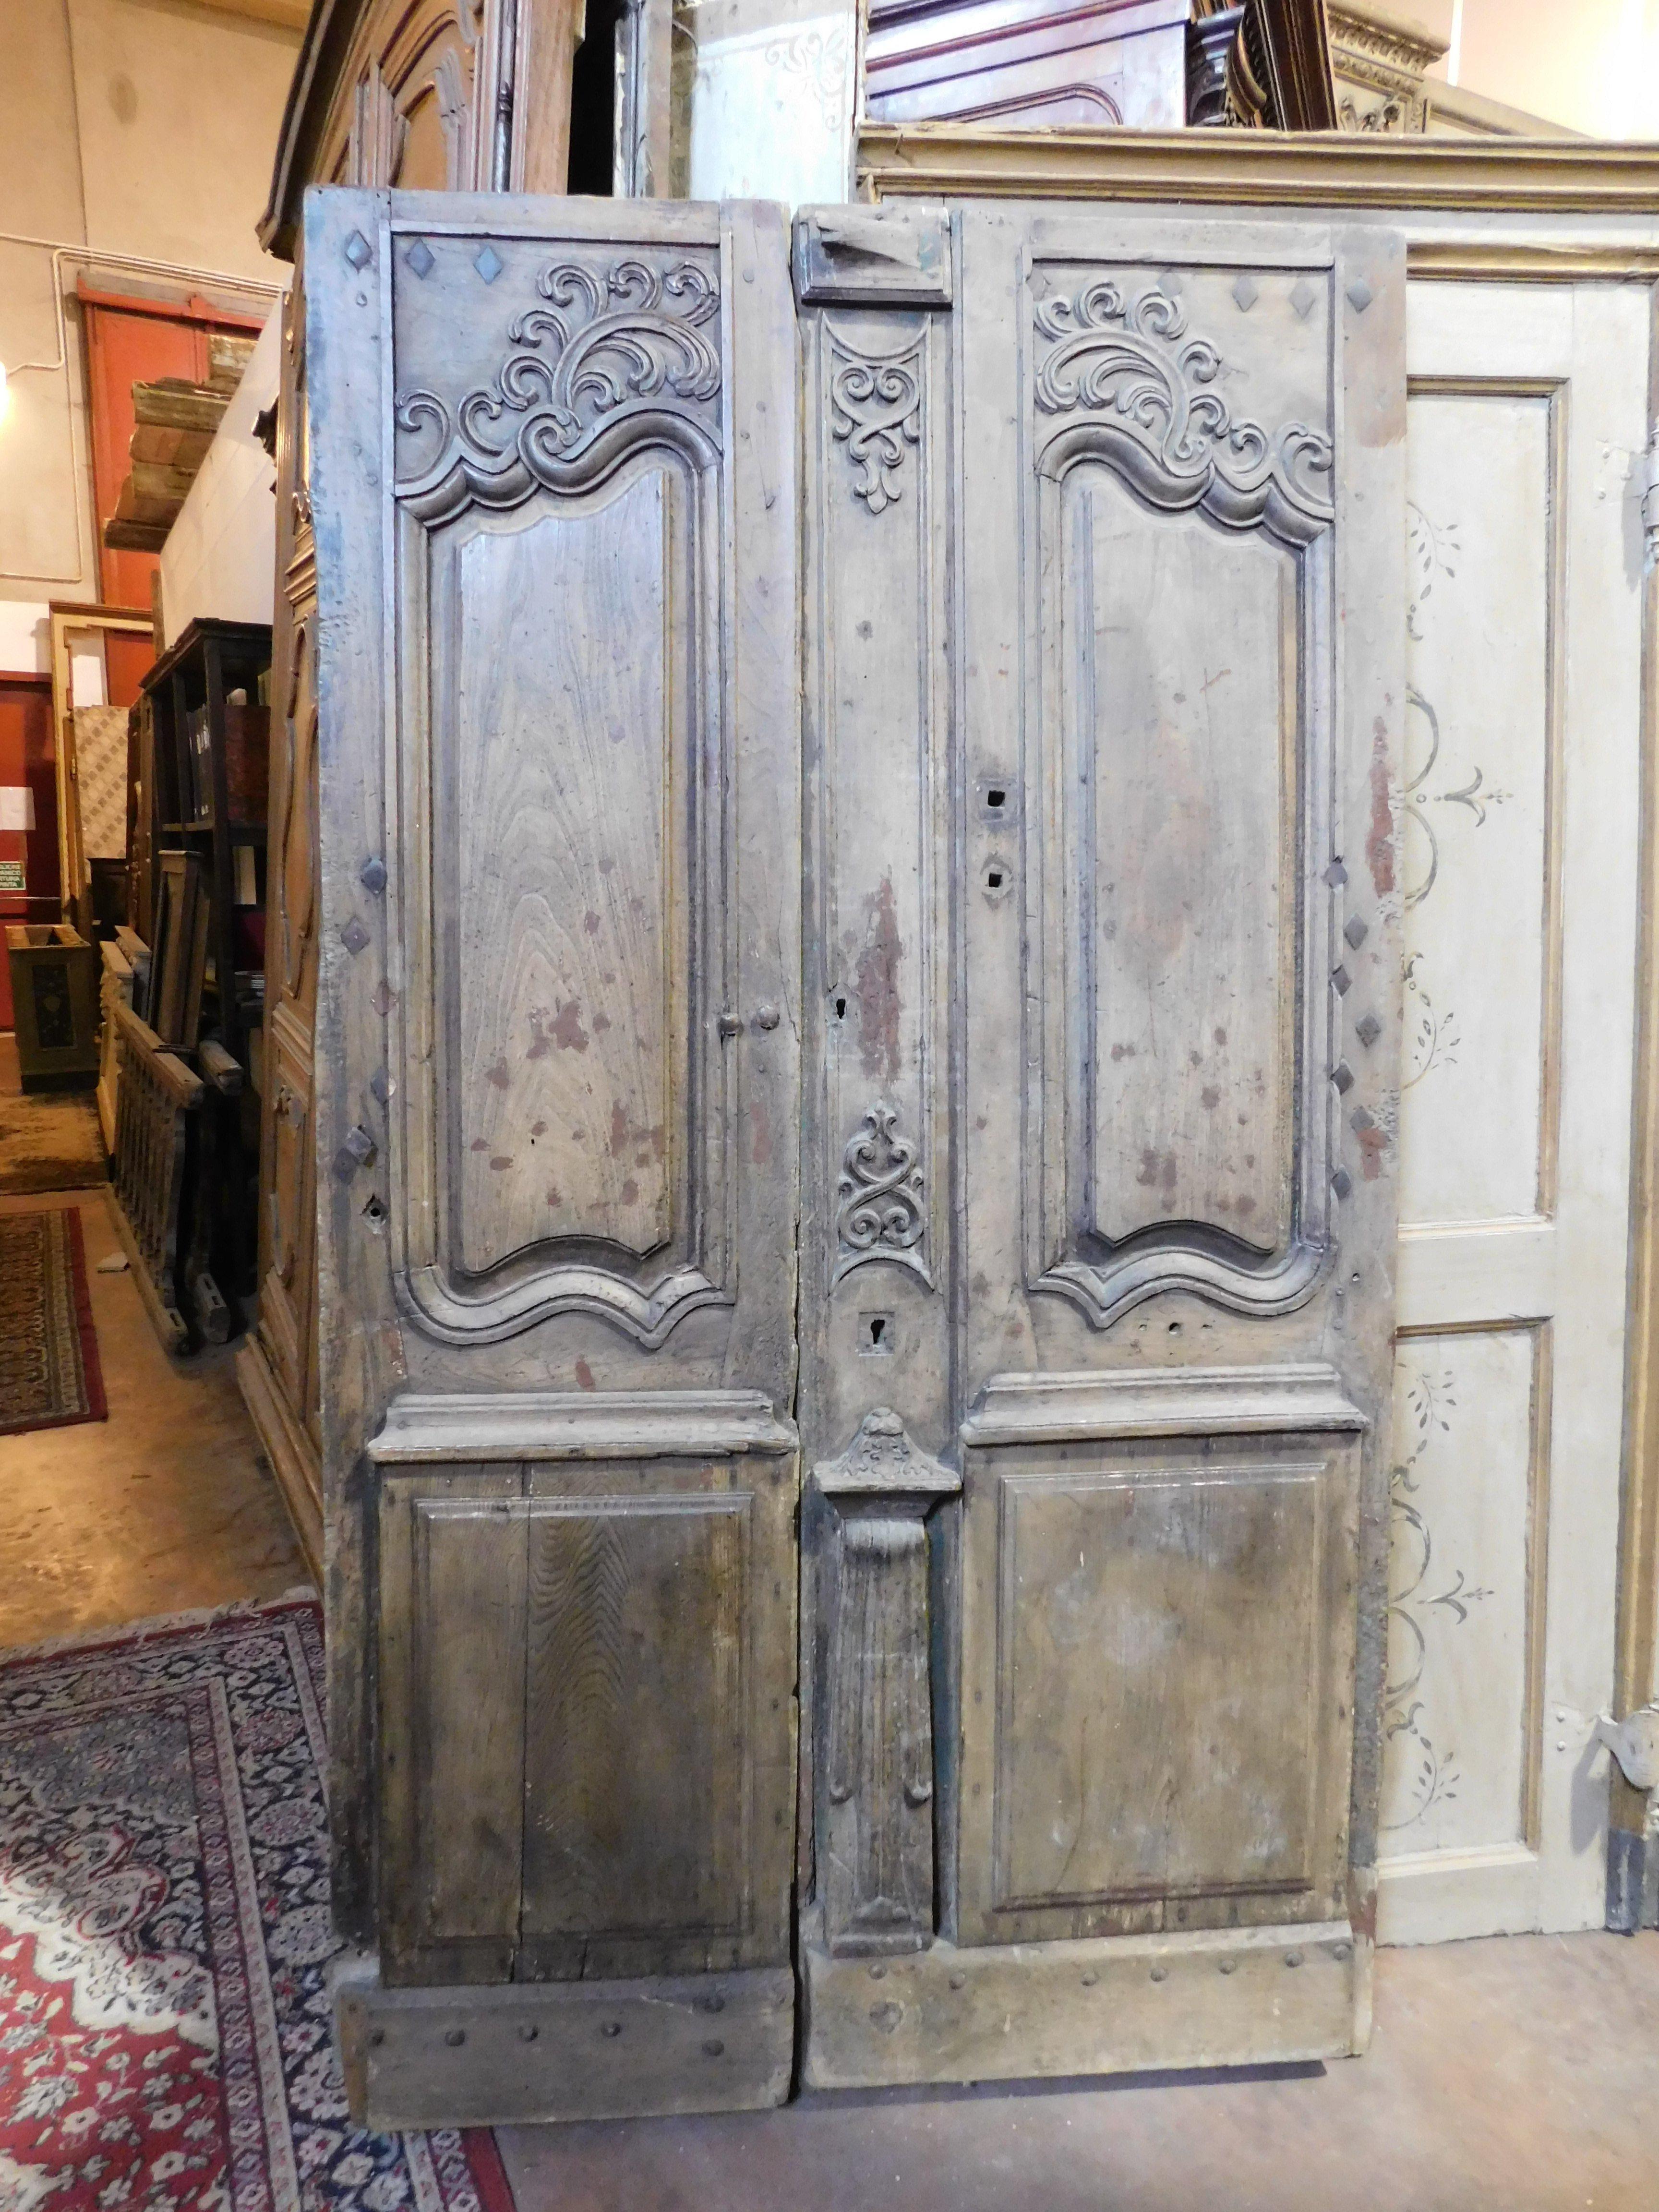 Antique Entrance door, double swing door With wavy carved panels, oak wood, from France (Lyon) from the 1800s, measures w 118 X H 206 cm, very solid, ideal in a country or chic entrance with history and tradition. the widest sash measures 68 cm.
